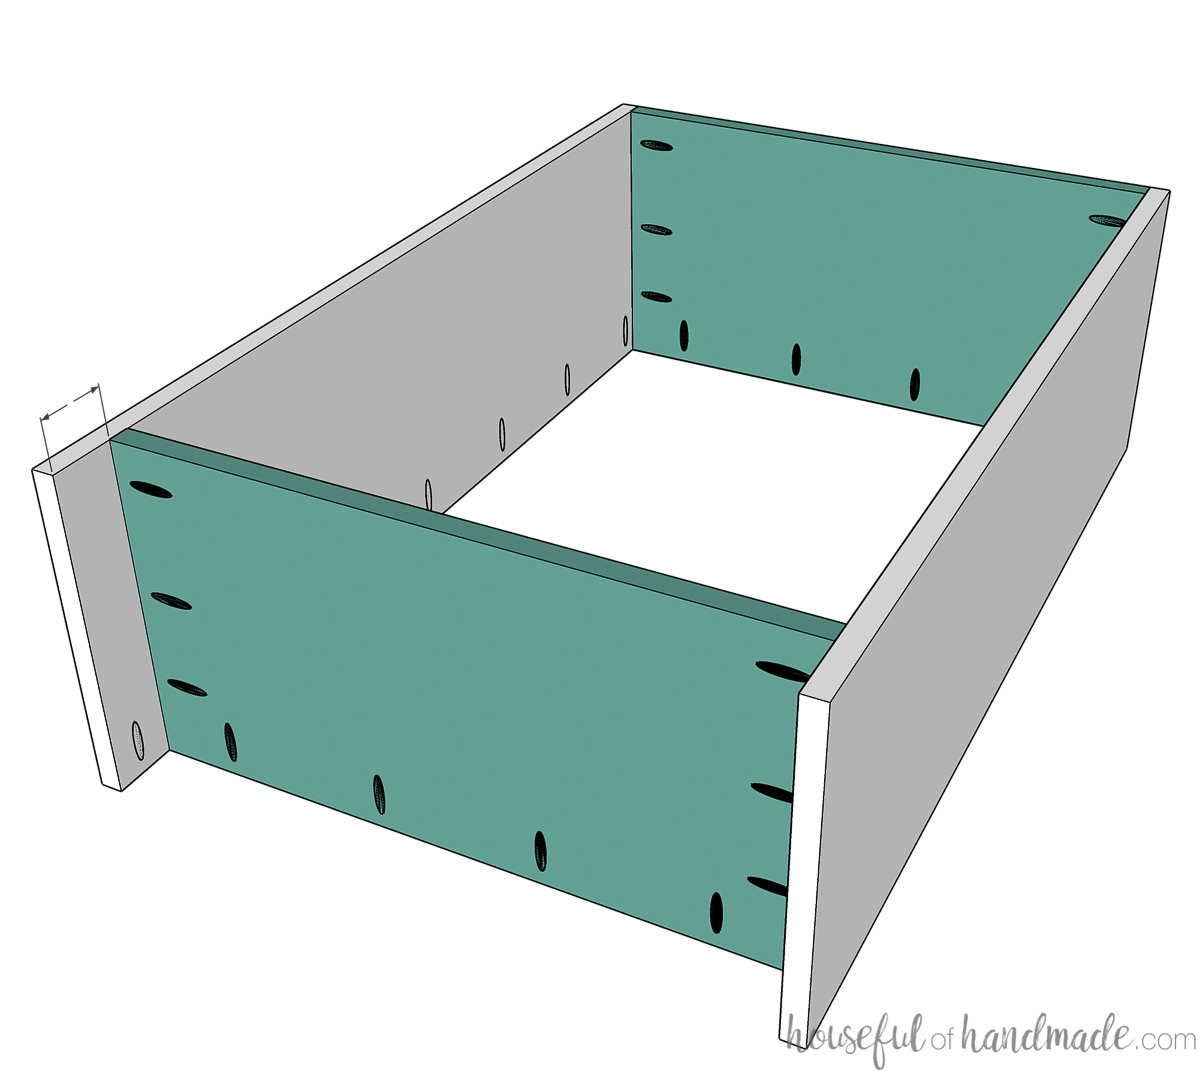 Sketch of bookcase top and bottom attached to the sides.